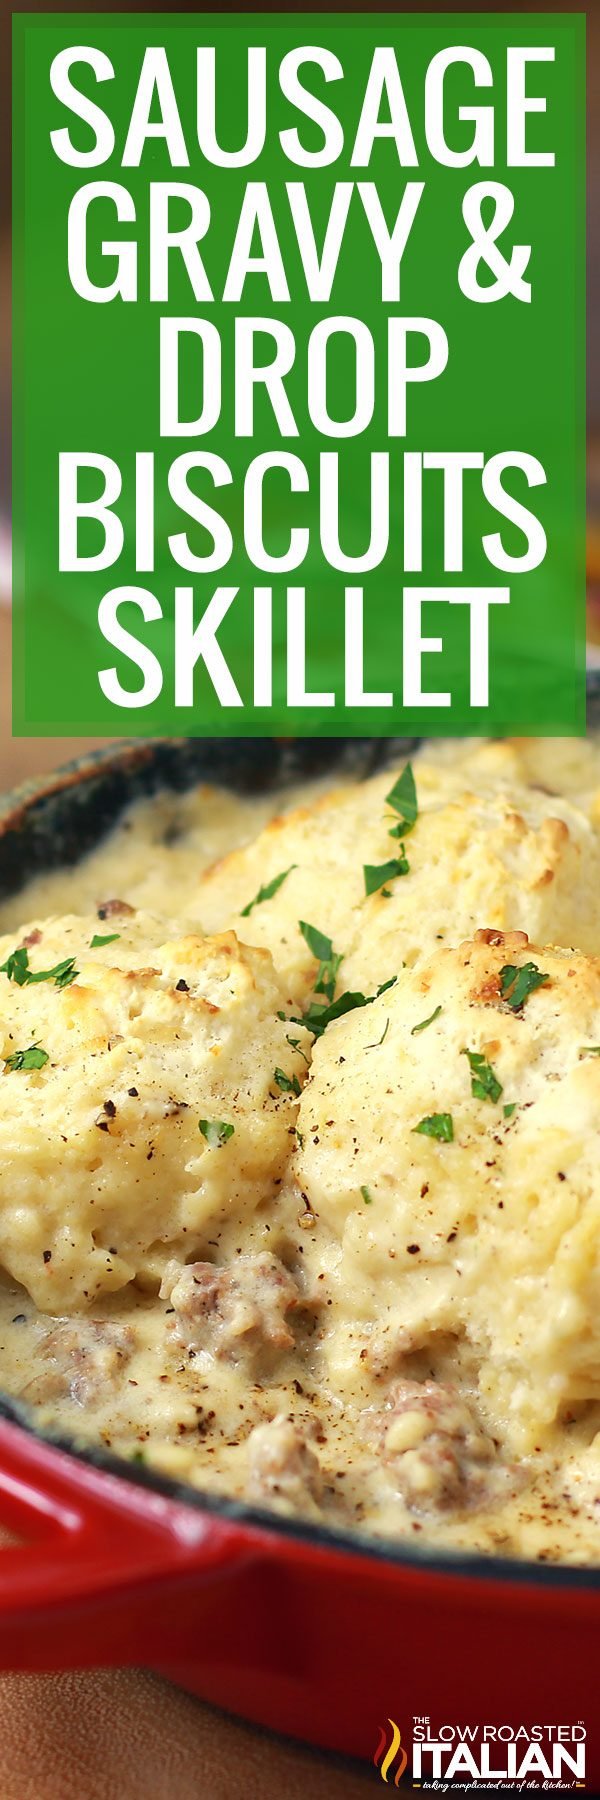 titled image for sausage gravy and drop biscuits skillet